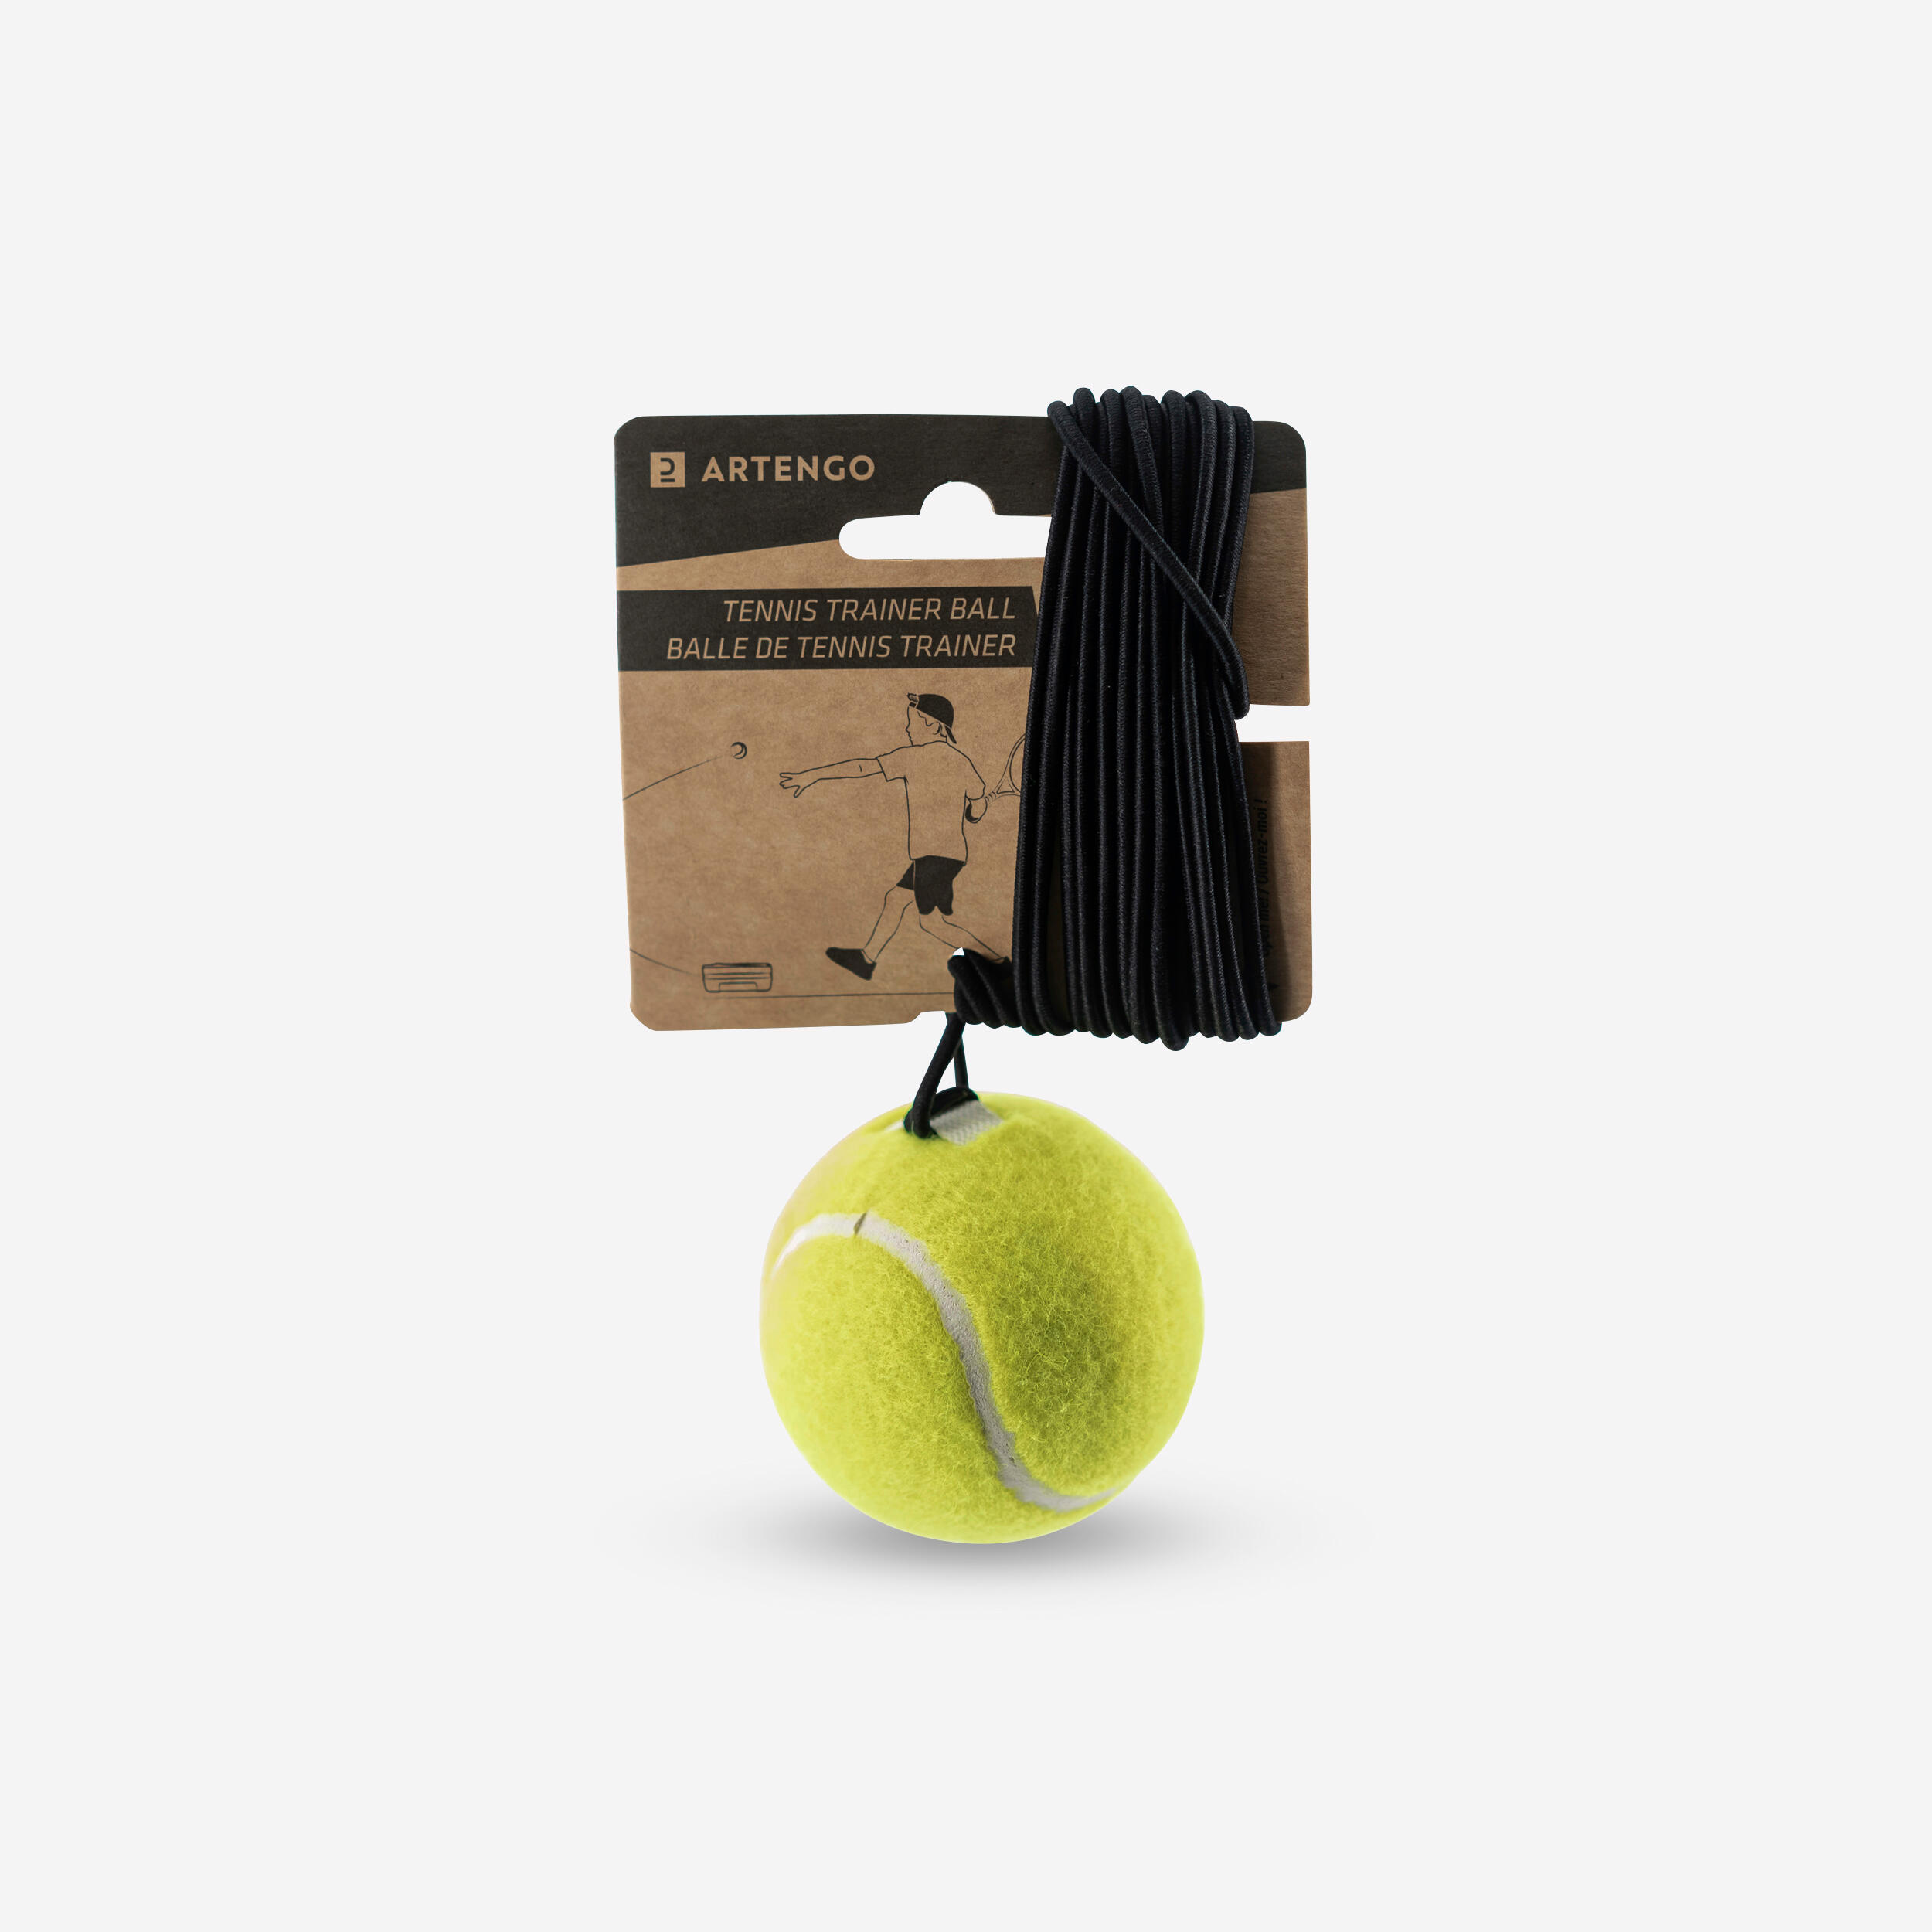 Tennis Ball and Elastic Cord for Tennis Trainer - Ball’s Back